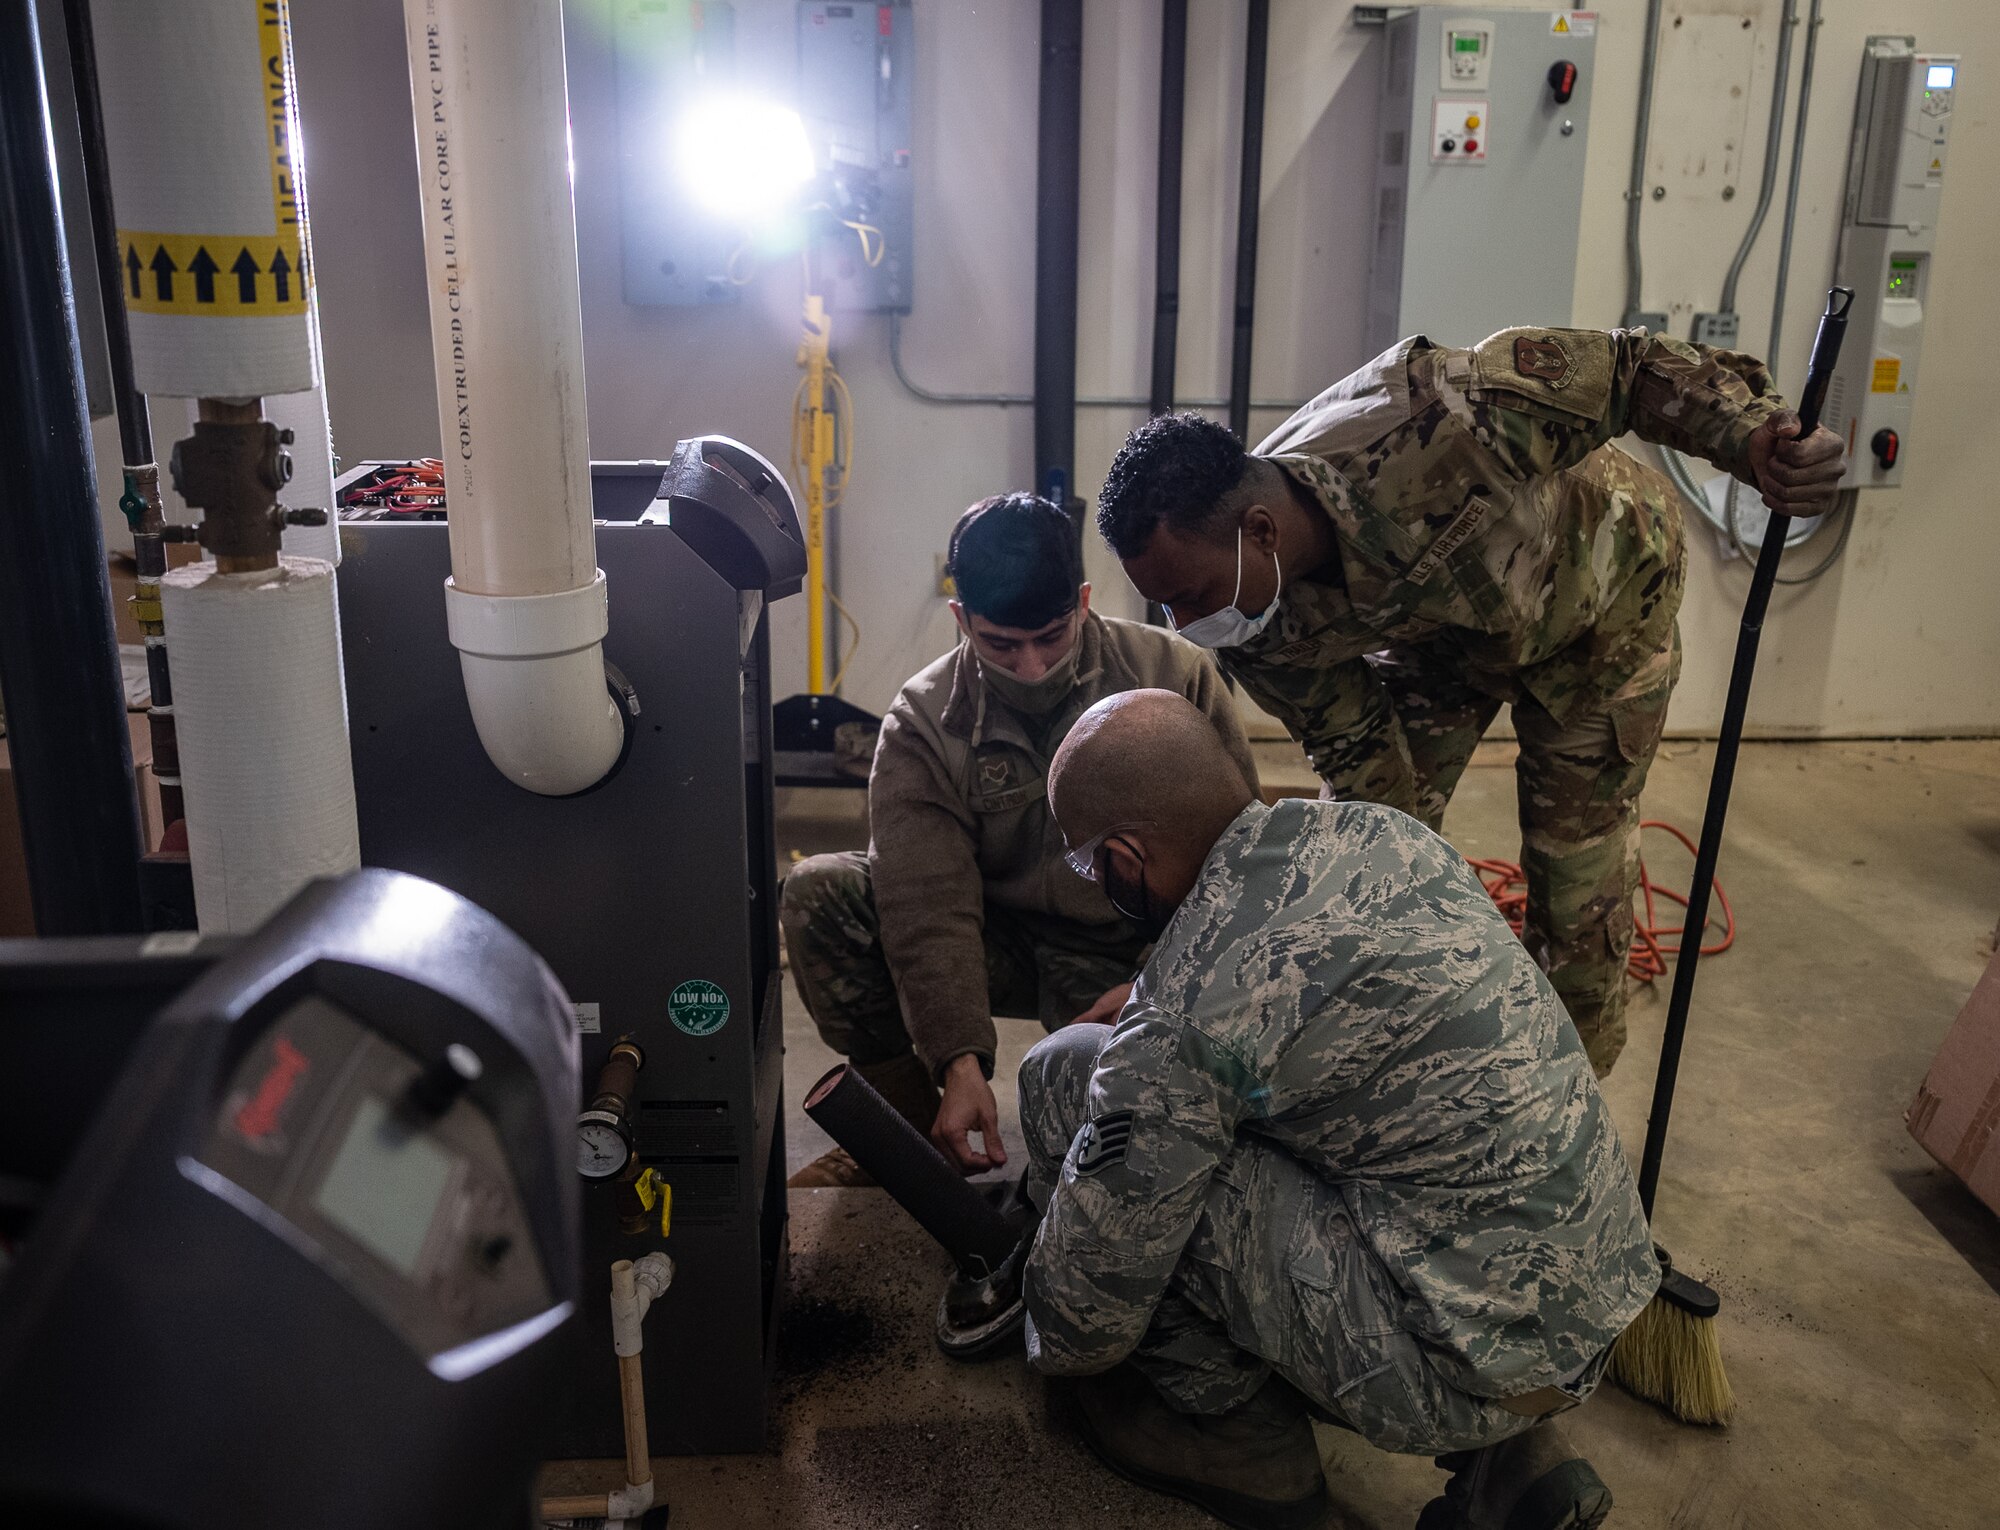 932nd Civil Engineer Squadron, heating, ventilation, and air conditioning Airmen inspect the heating exchange before replacing inside the heating boiler unit February 5, 2021, inside building 3651, the 932nd Medical Group building, Scott Air Force Base, Illinois.  (U.S. Air Force photo by Christopher Parr)